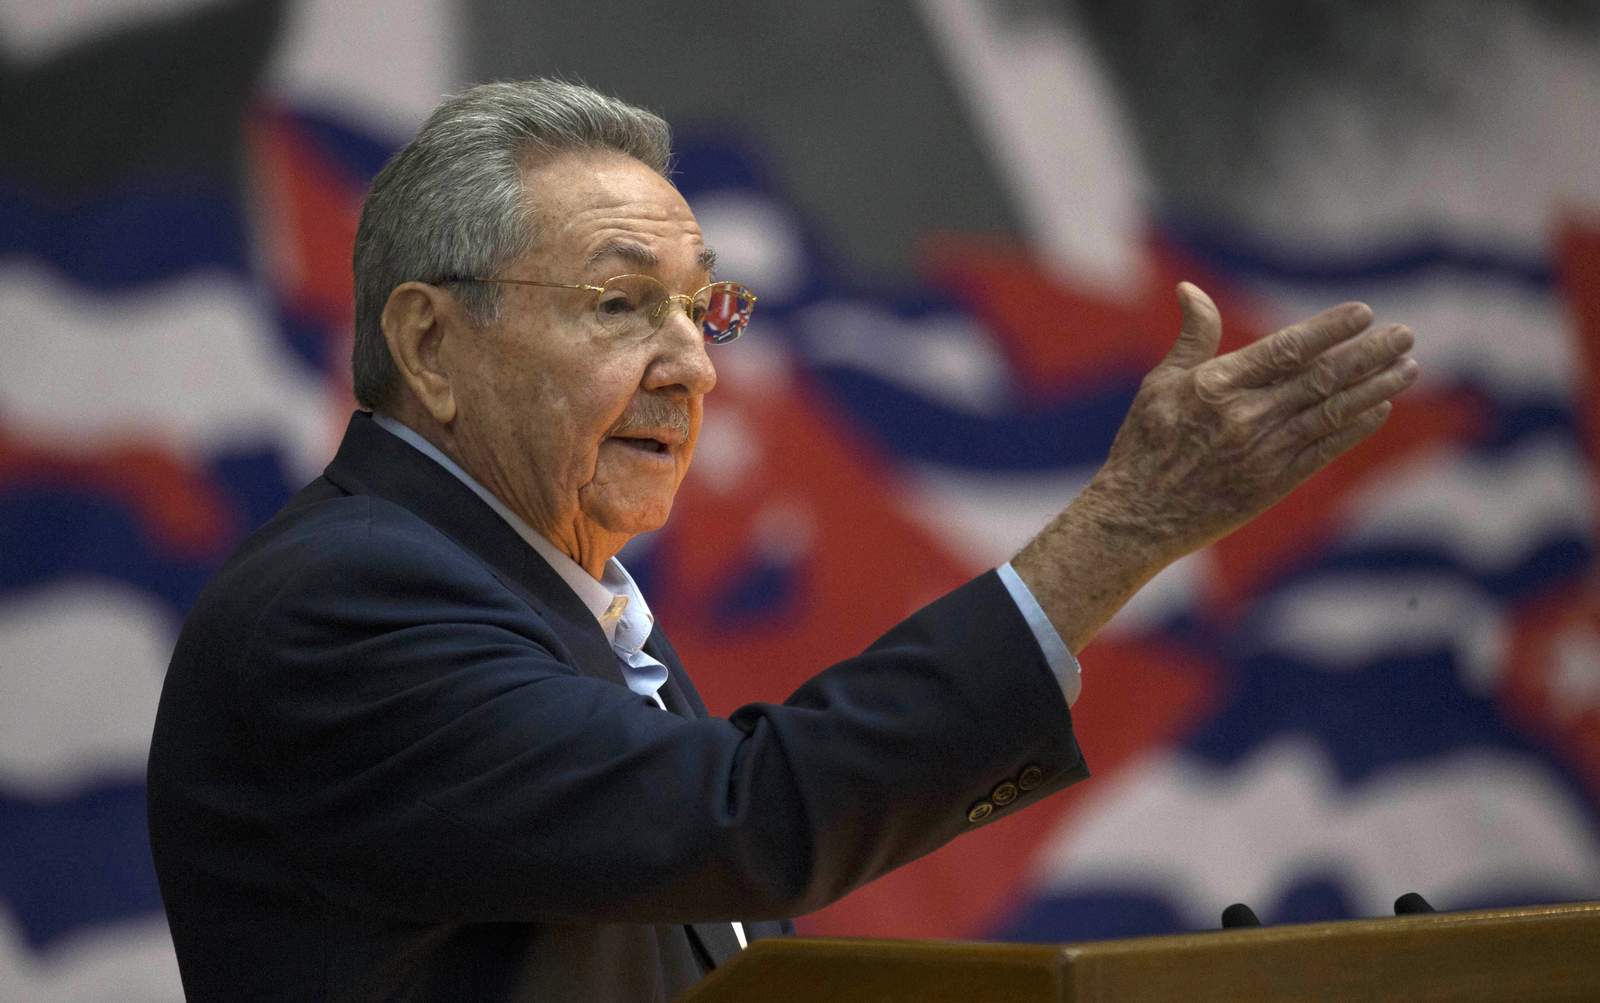 A retiring Castro to bring younger face to Cuba's communists